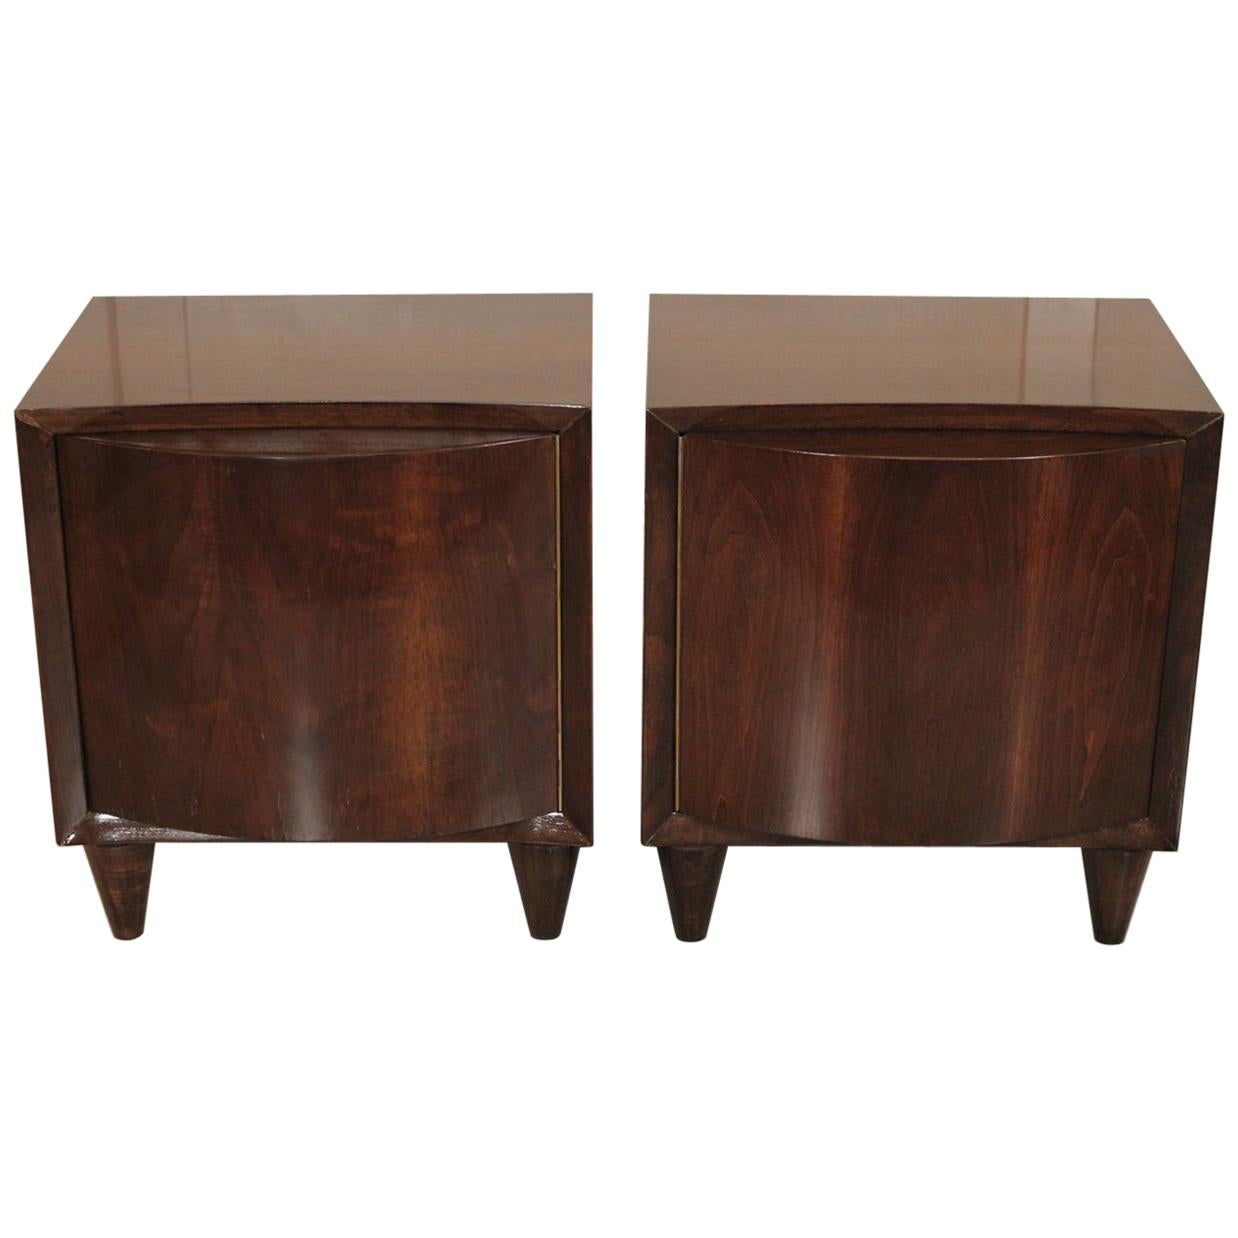 Chic Mid-Century Modern Pair of Walnut Side or End Tables by Modernage